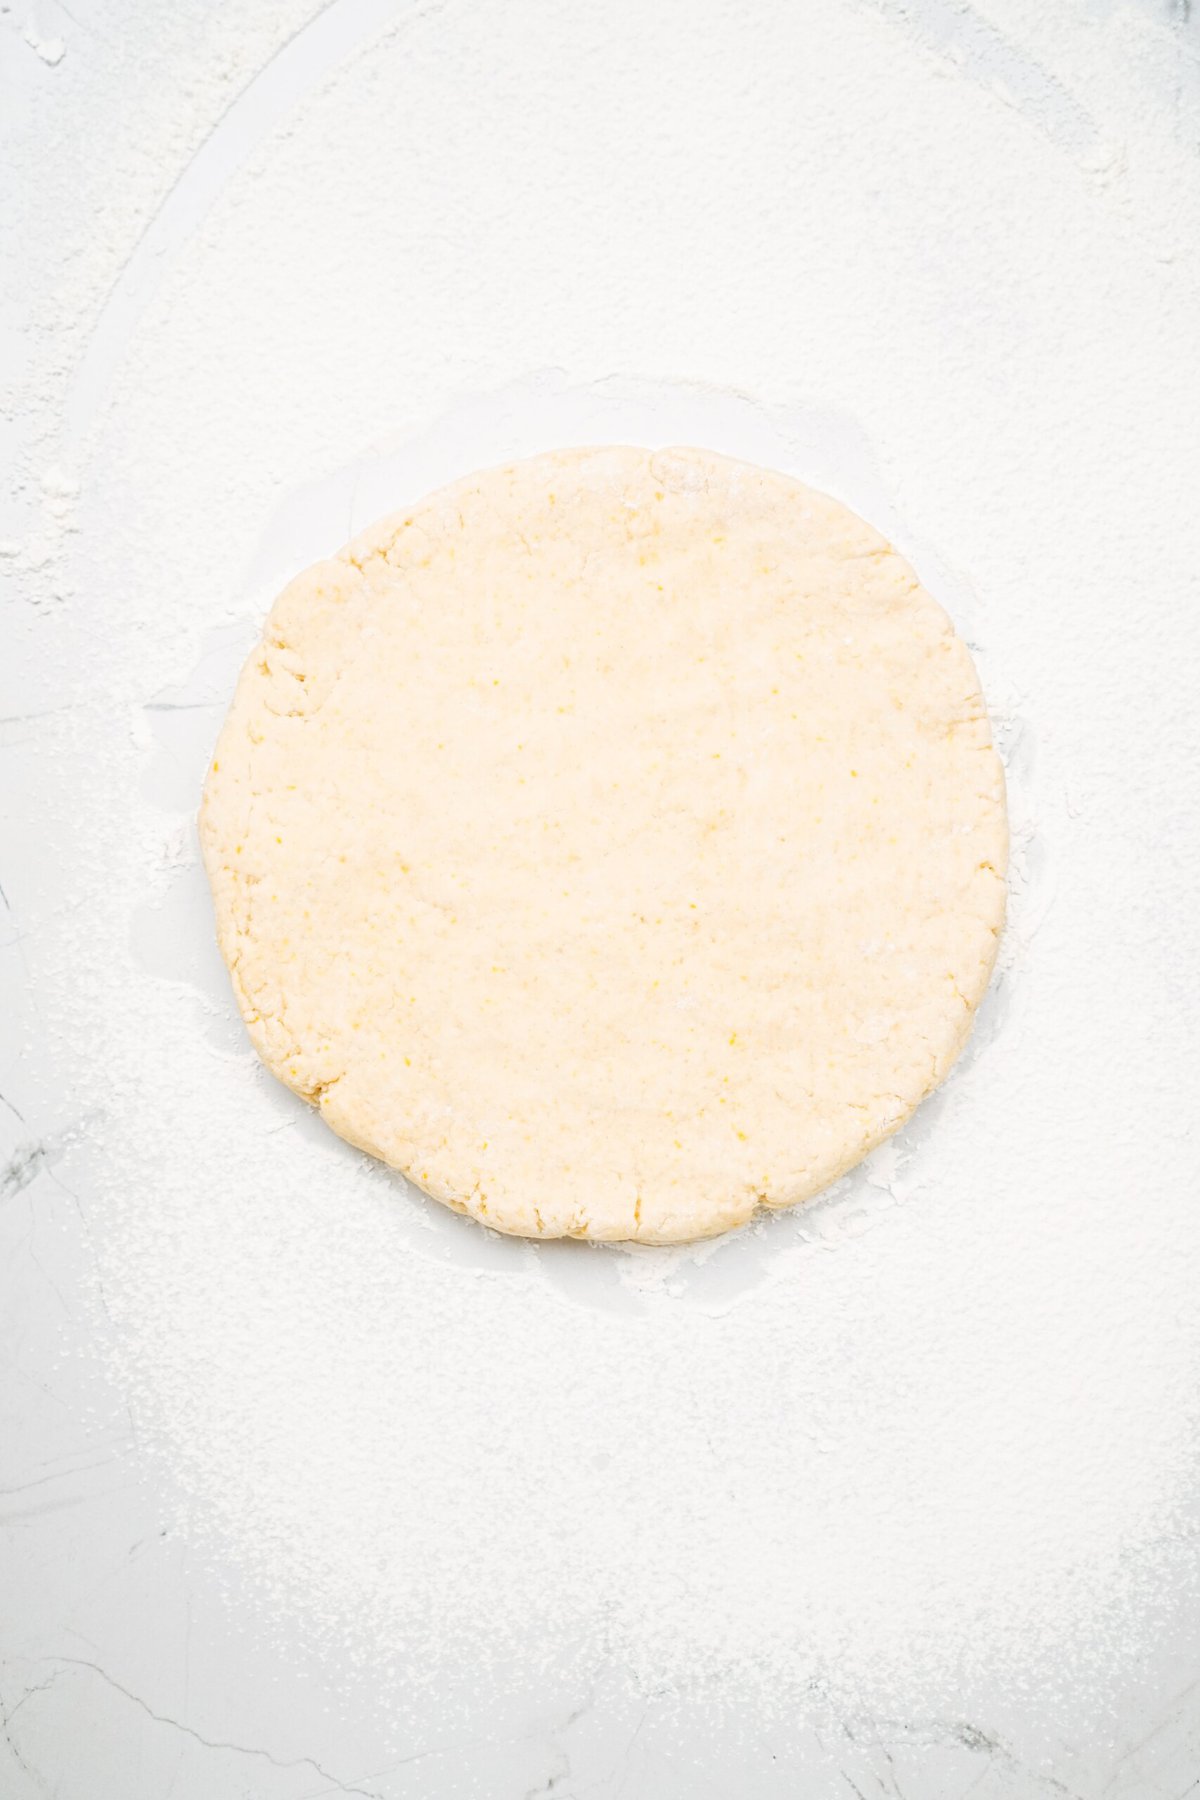 scone dough formed into a circle